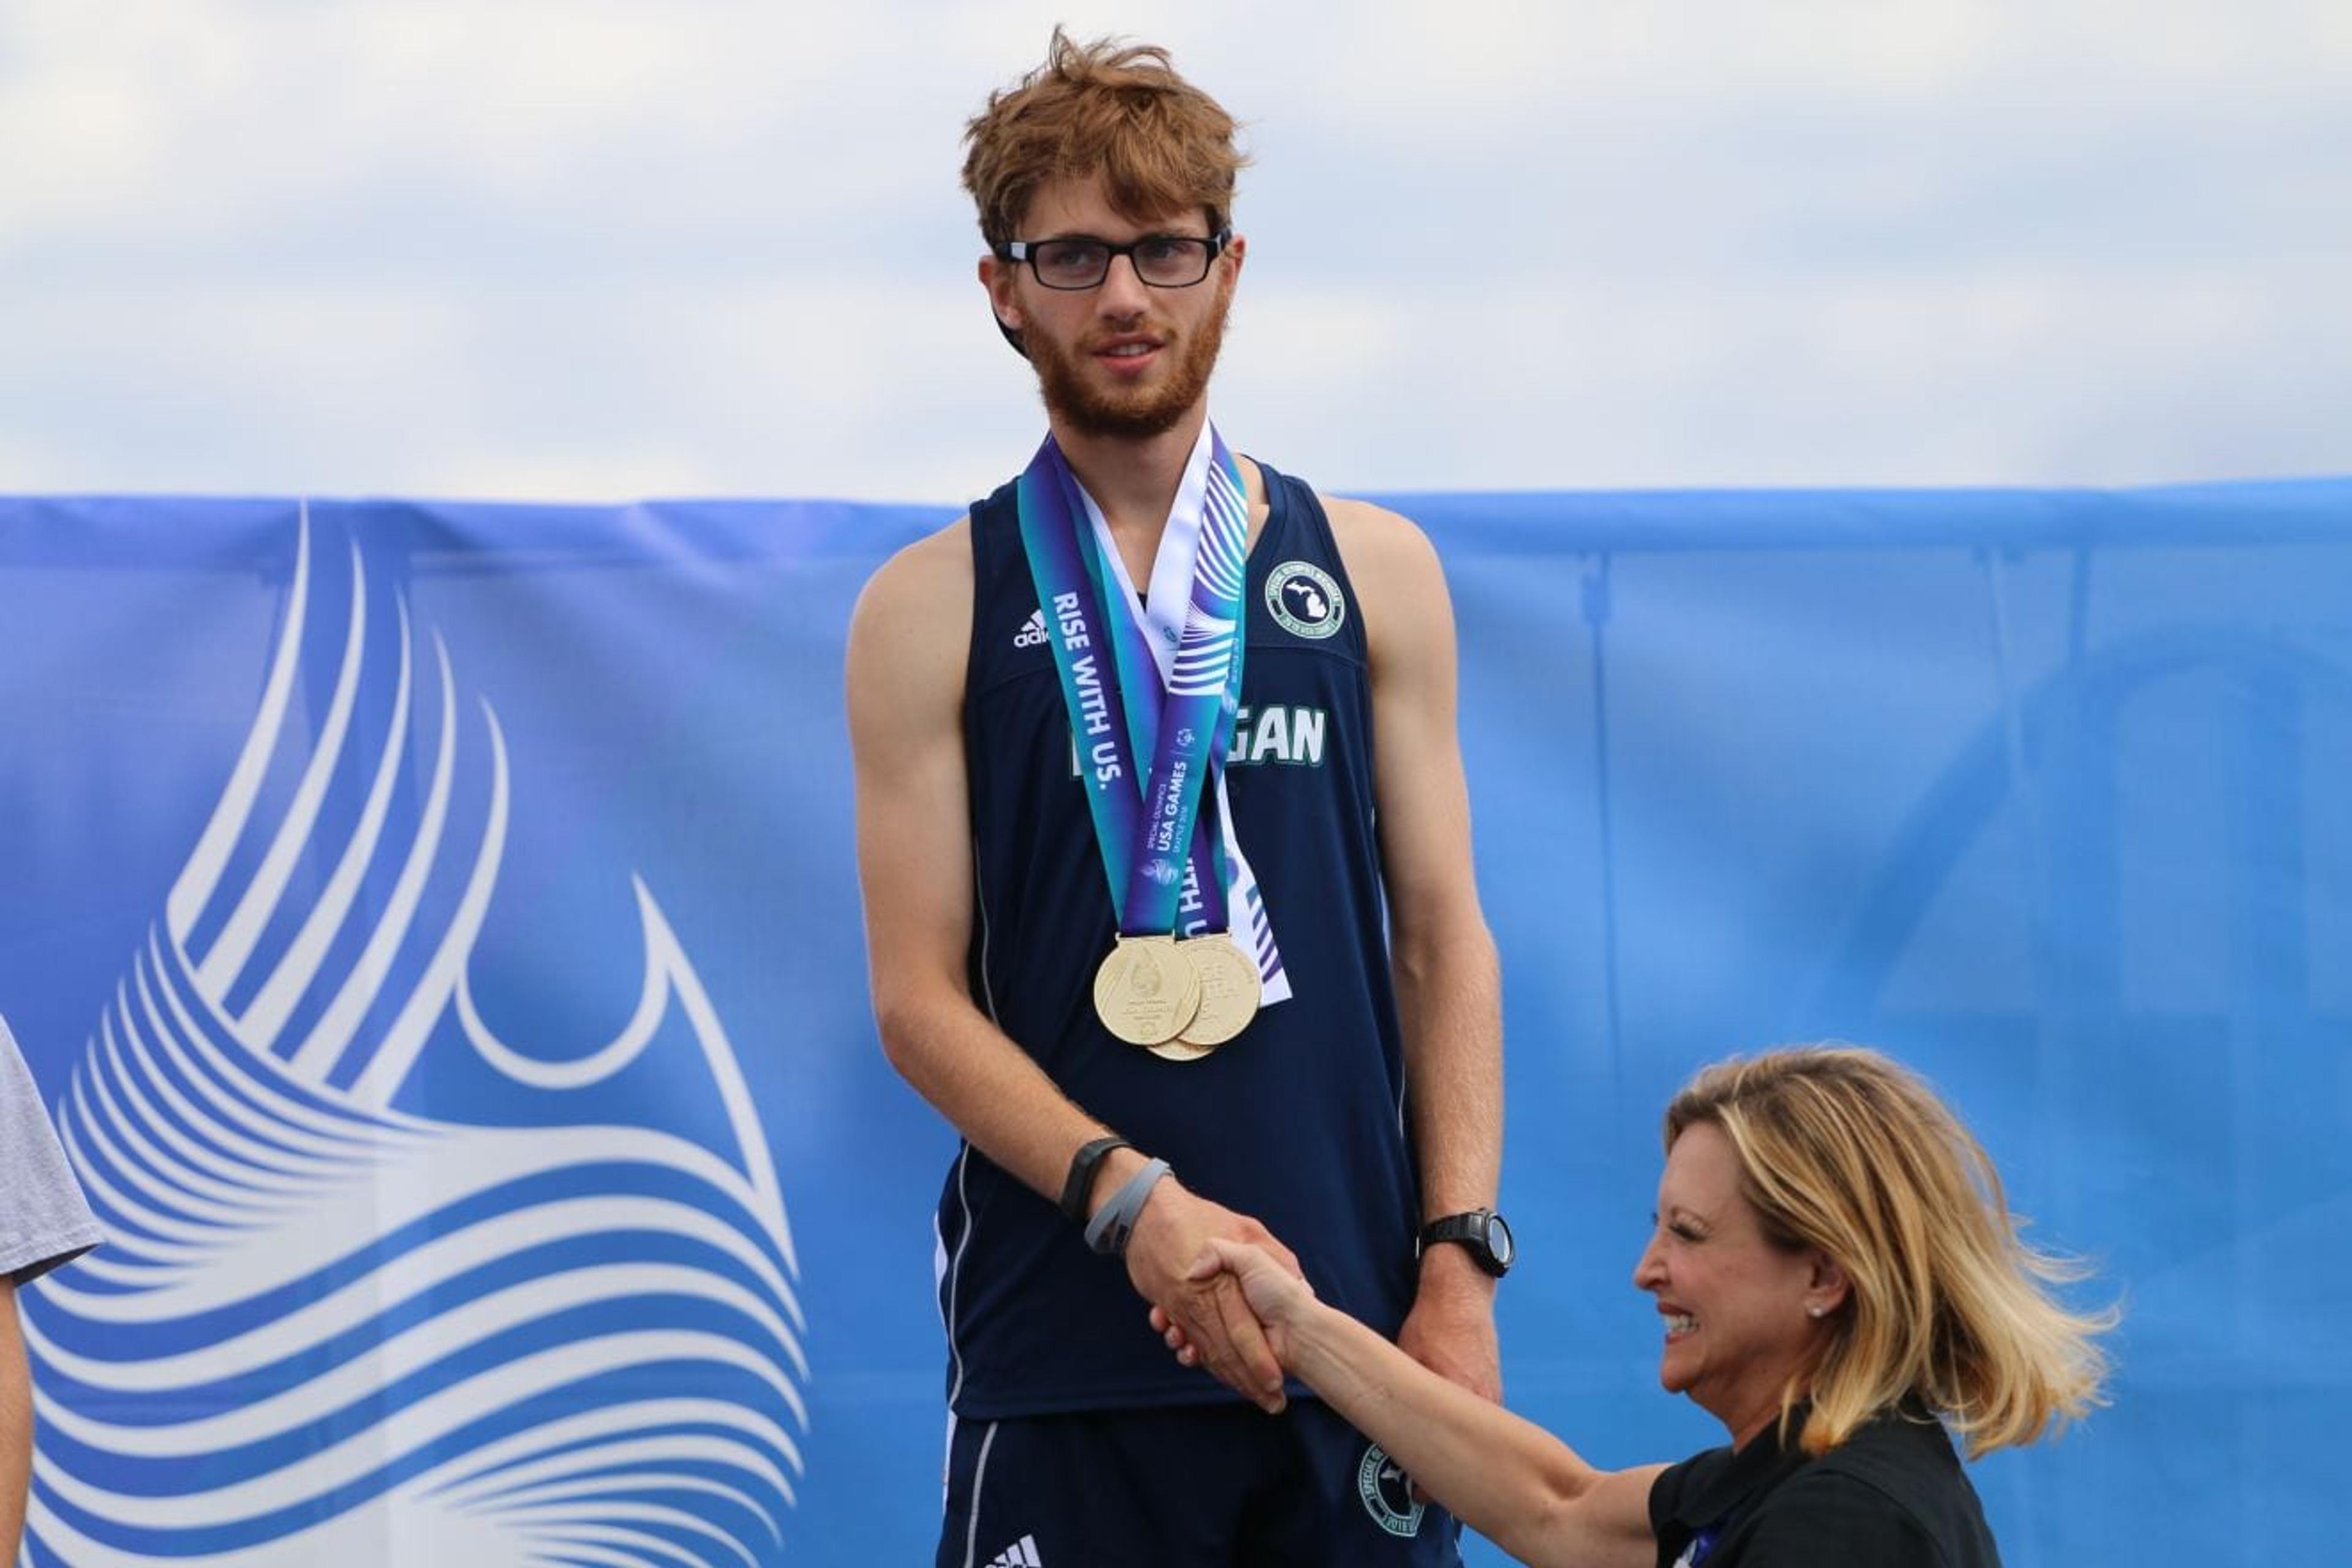 Julian Borst receiving his medals at the 2018 Special Olympics USA Games